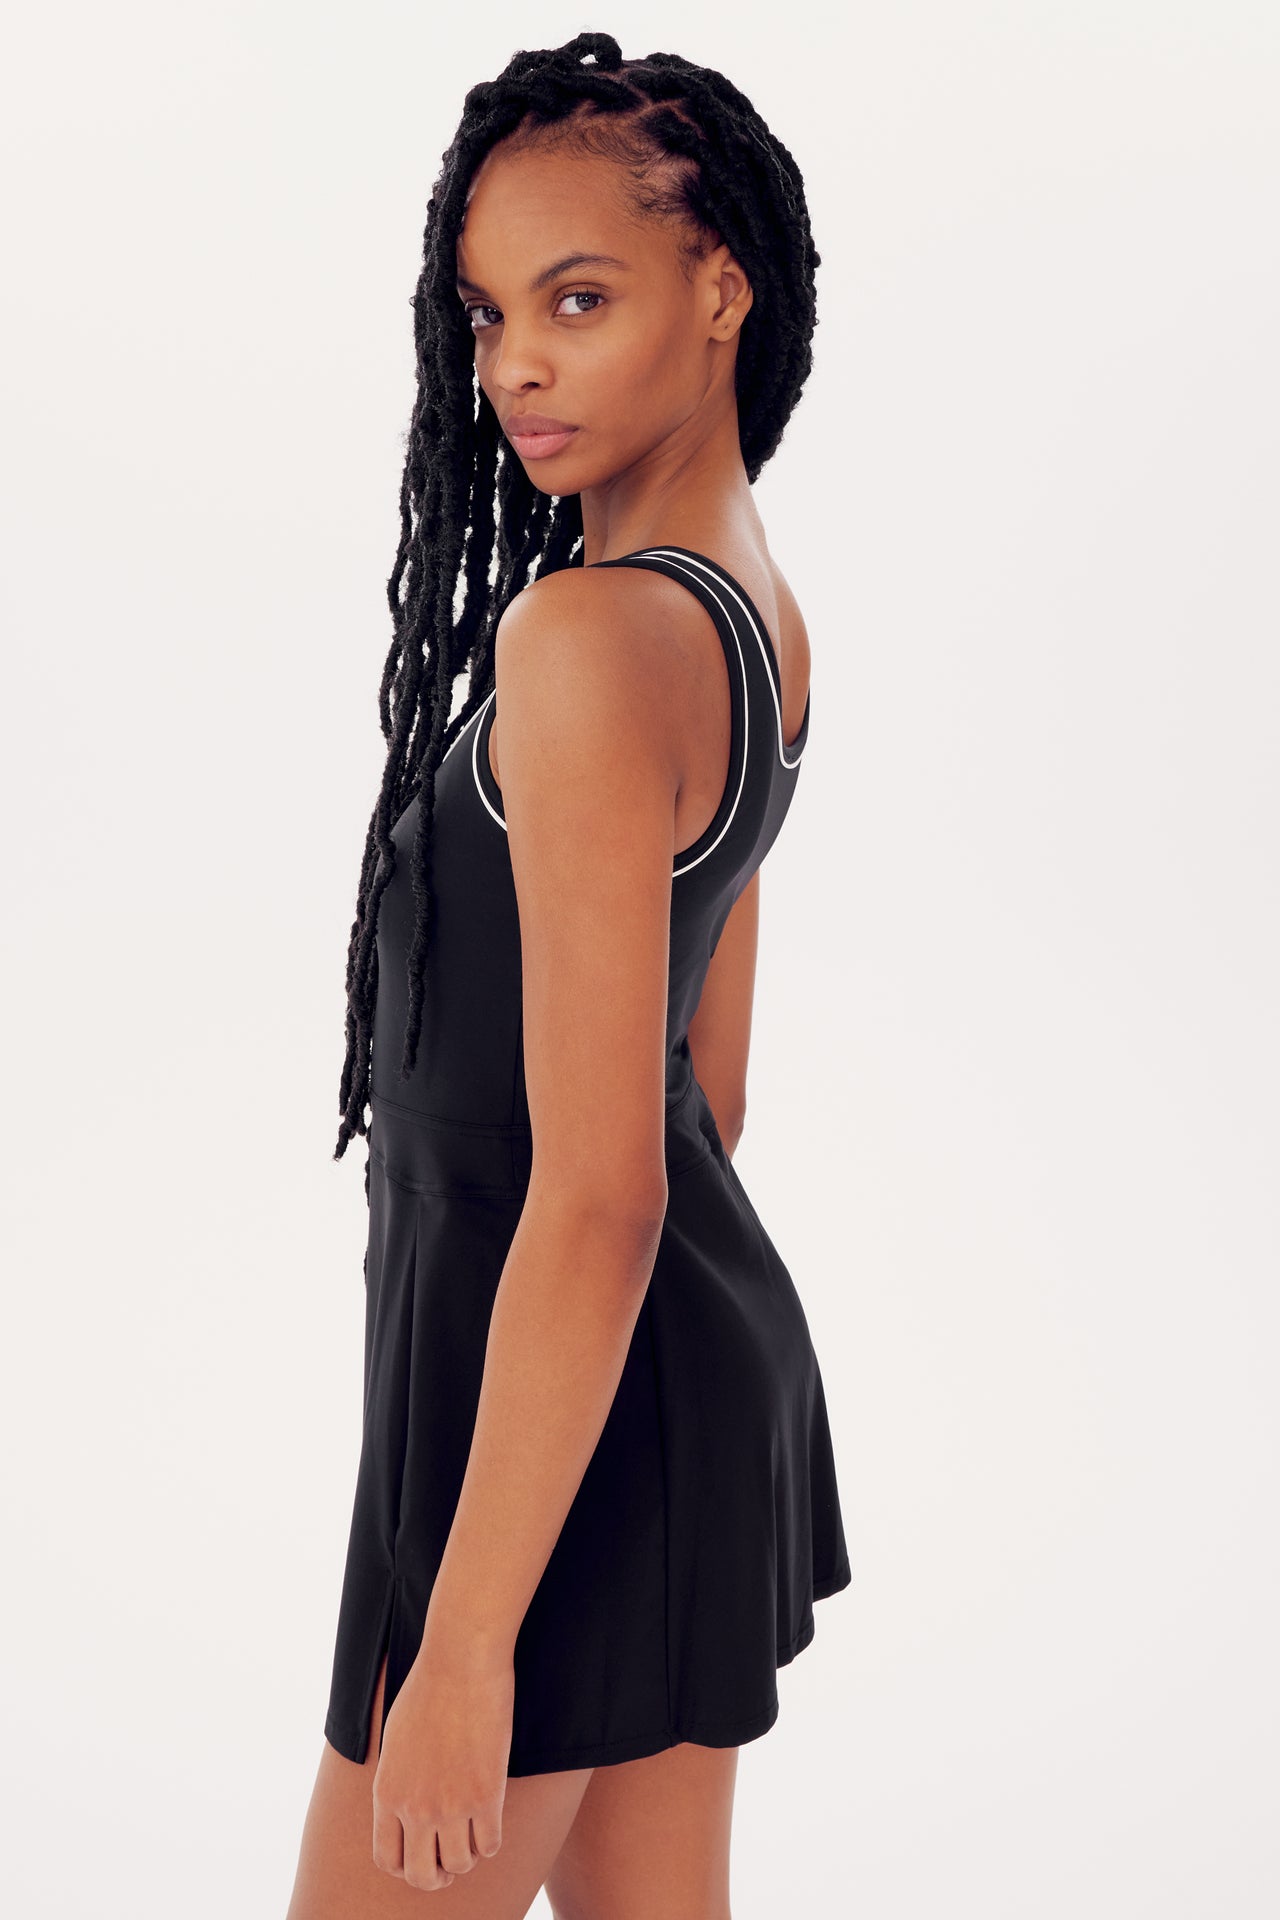 A woman with long braided hair wearing a Martina Rigor Dress W/Piping in black from SPLITS59, looking over her shoulder against a plain white background.